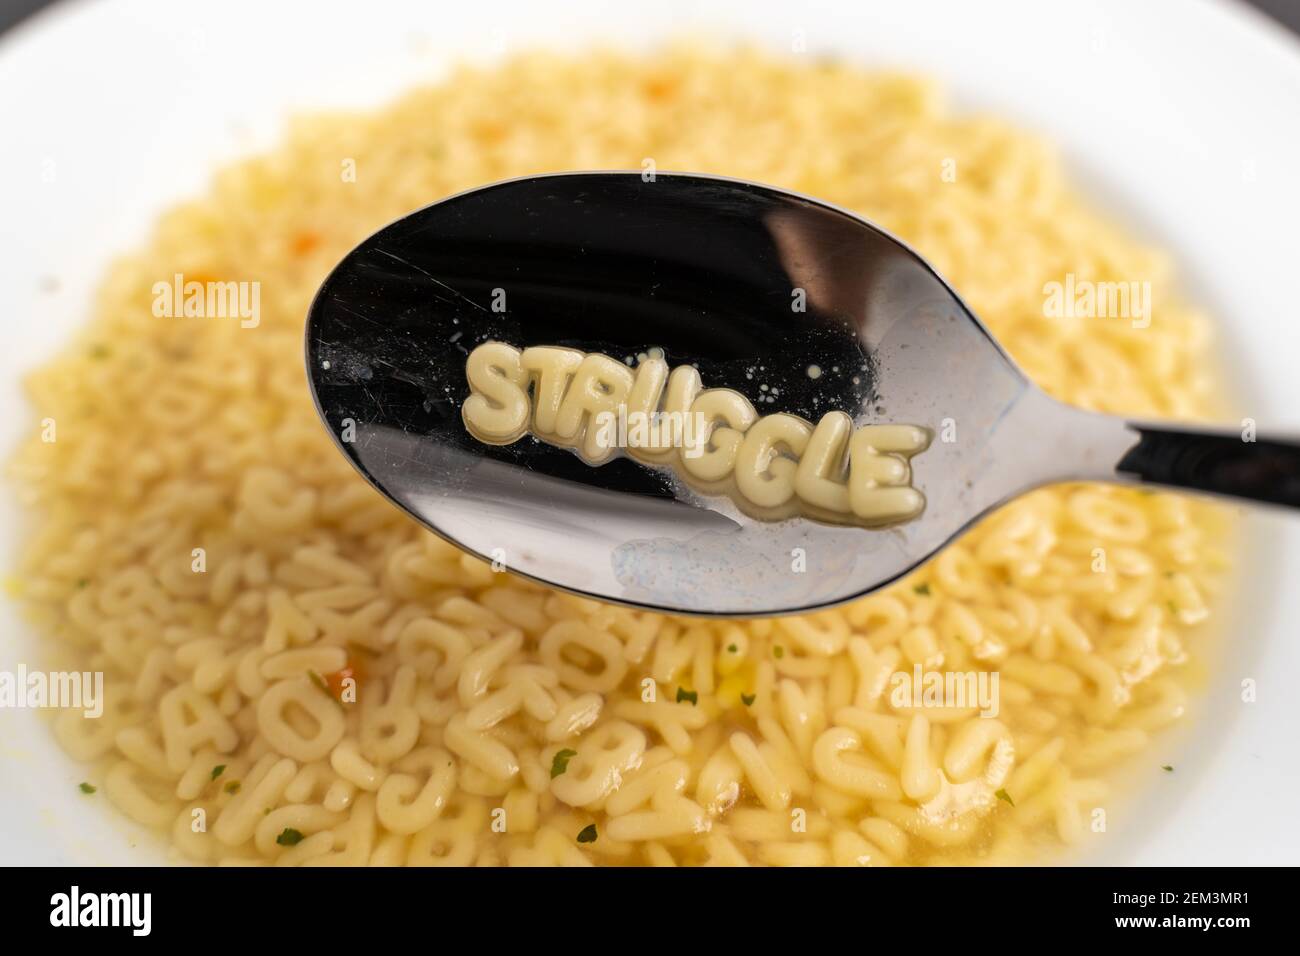 Alphabet soup letters with Struggle on the spoon, instant easy fast food because of poverty Stock Photo